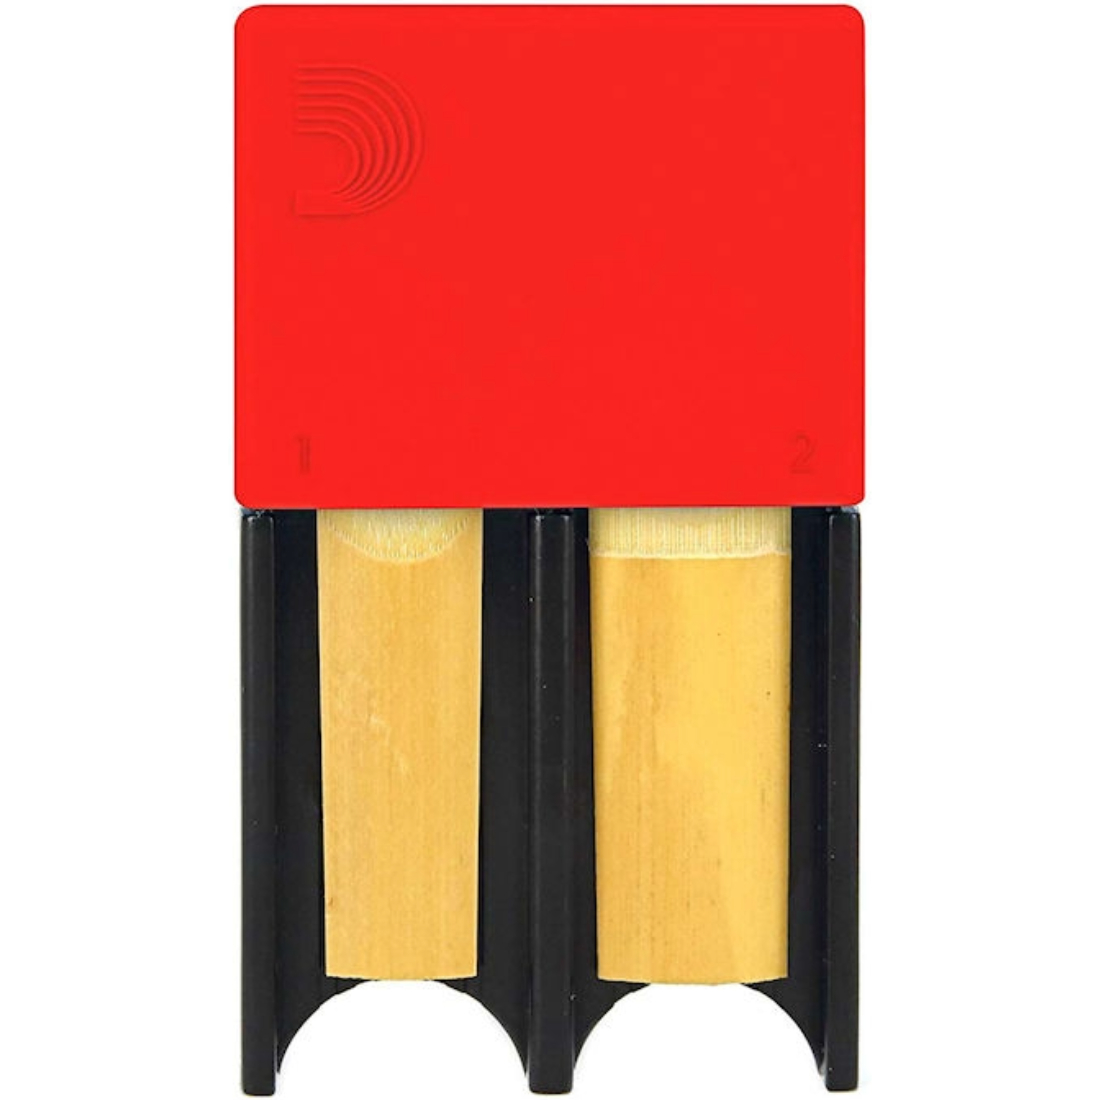 Black and red D'addario reed guard